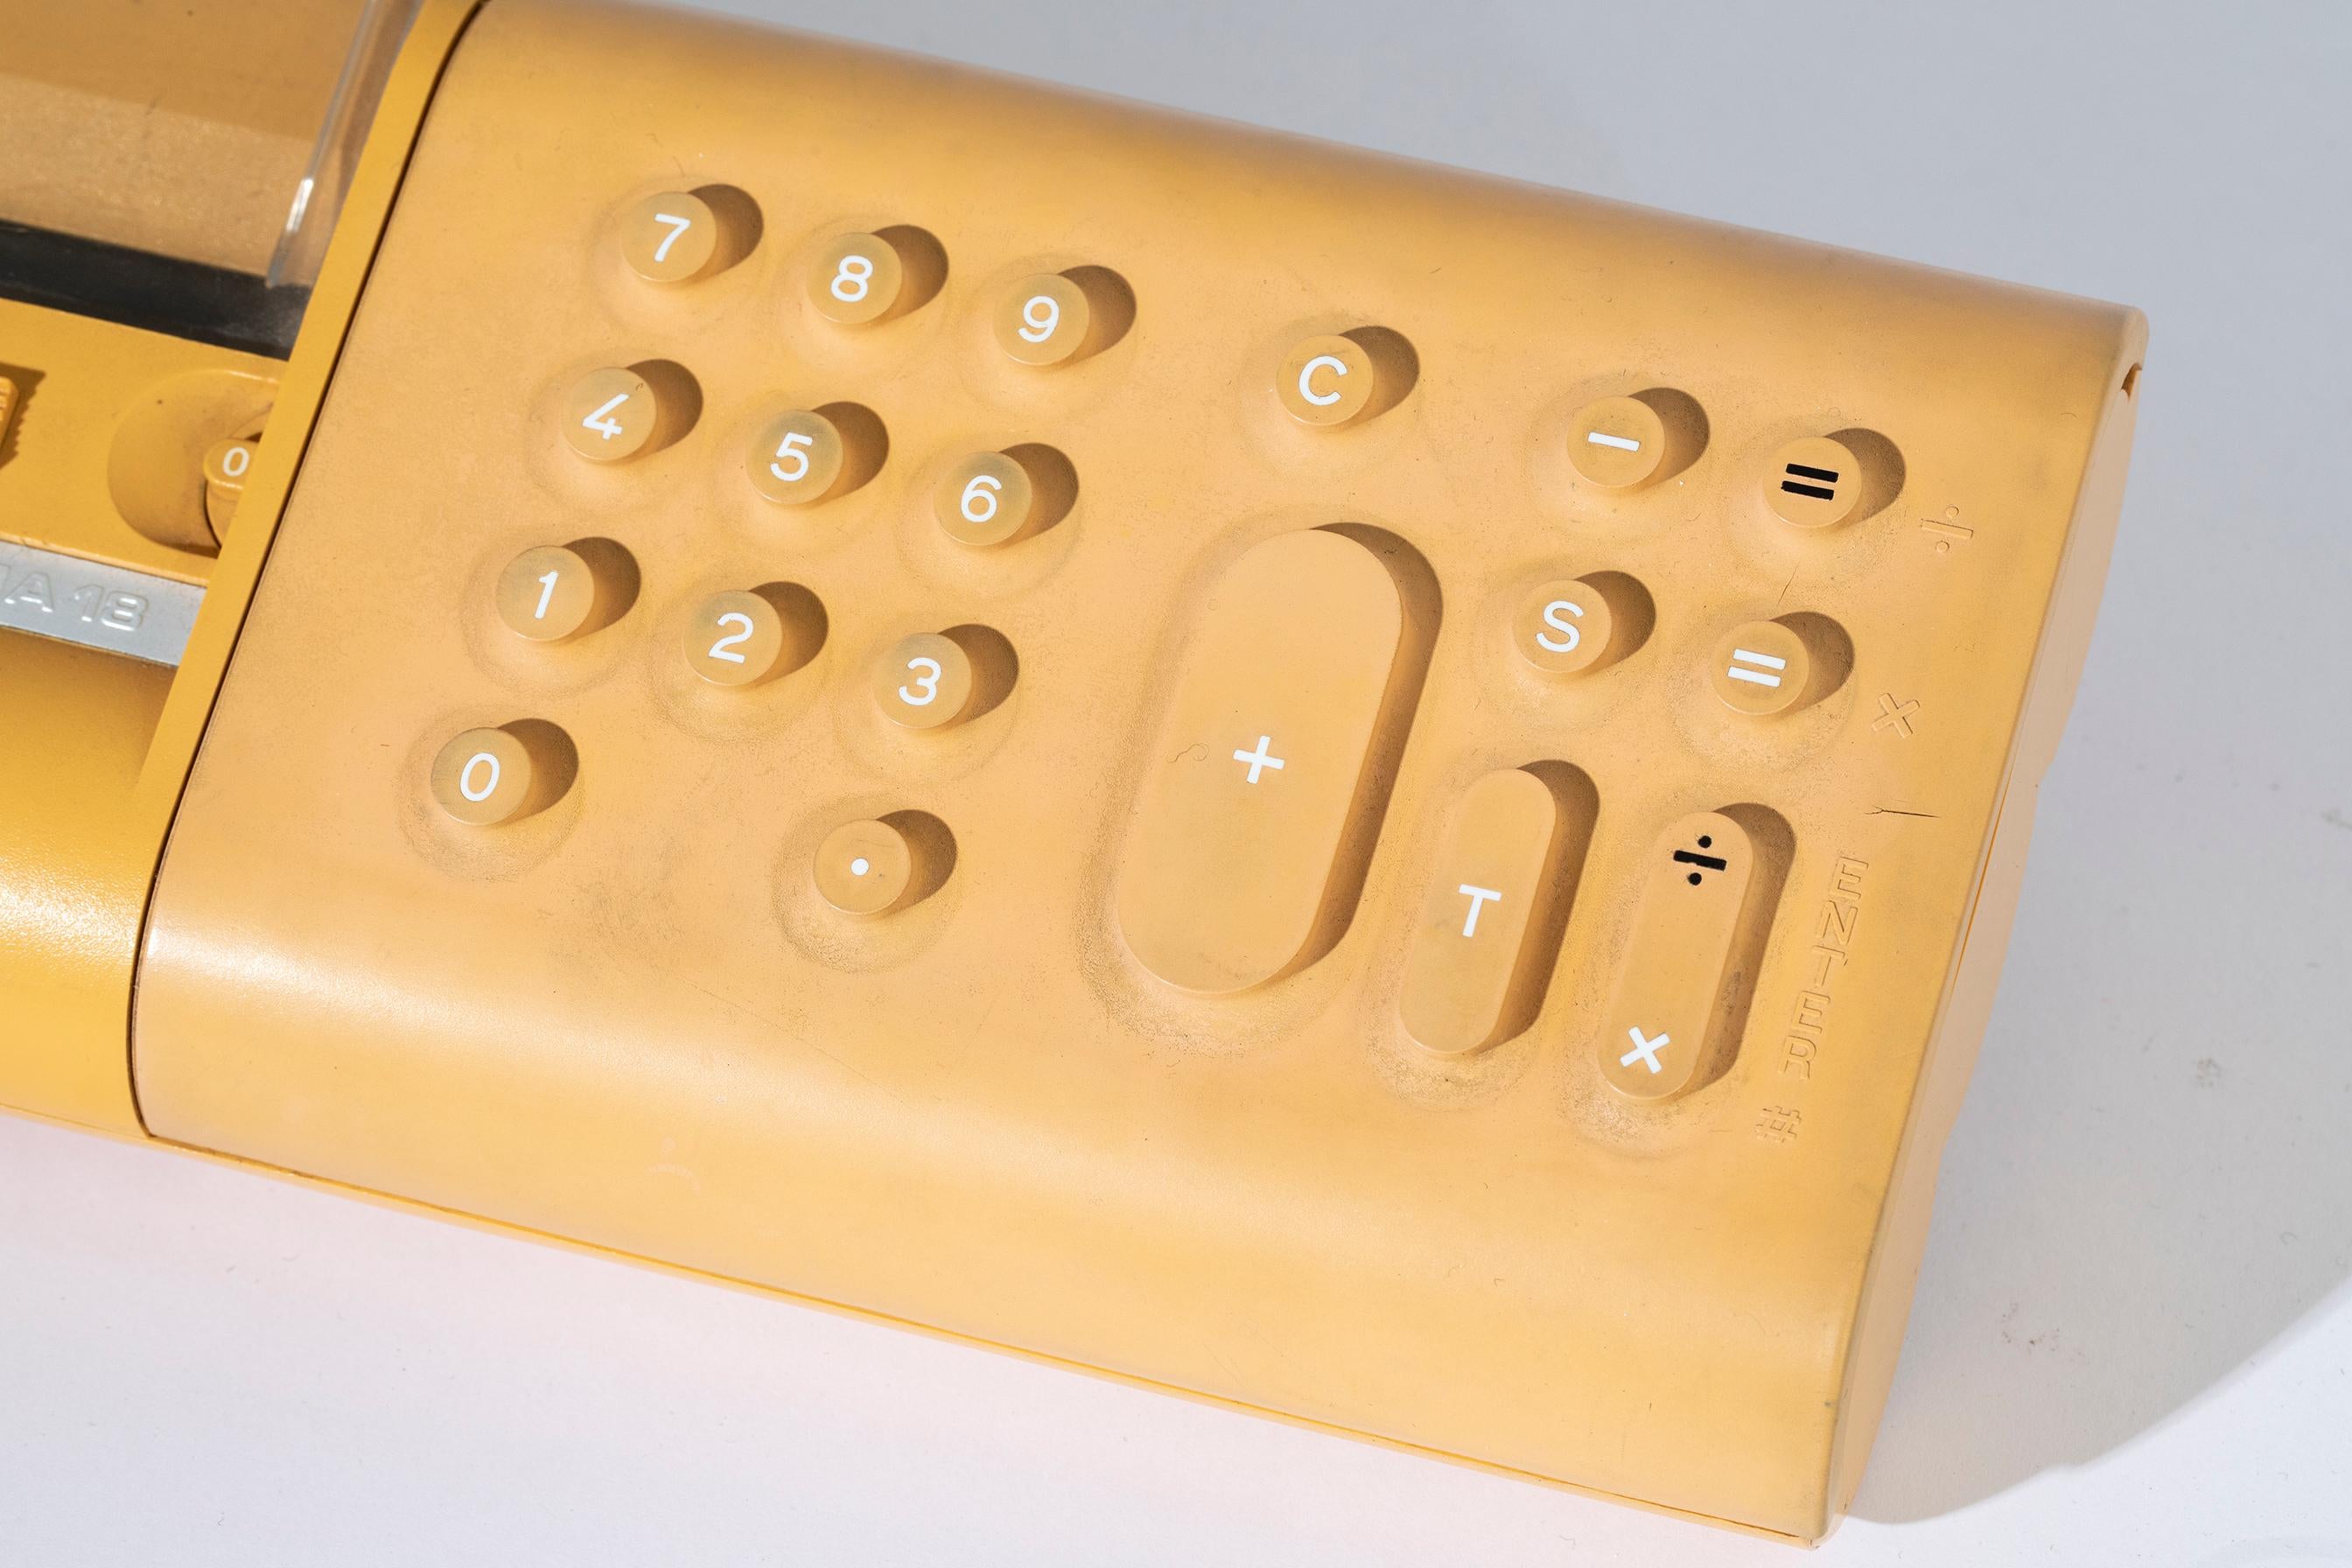 The Divisumma 18 is a portable electronic calculator made by Olivetti in 1973 through which the company entered the portable electronics market. 
Thanks to the design of Mario Bellini, who enlisted the collaboration of Dario De Diana, Alessandro De